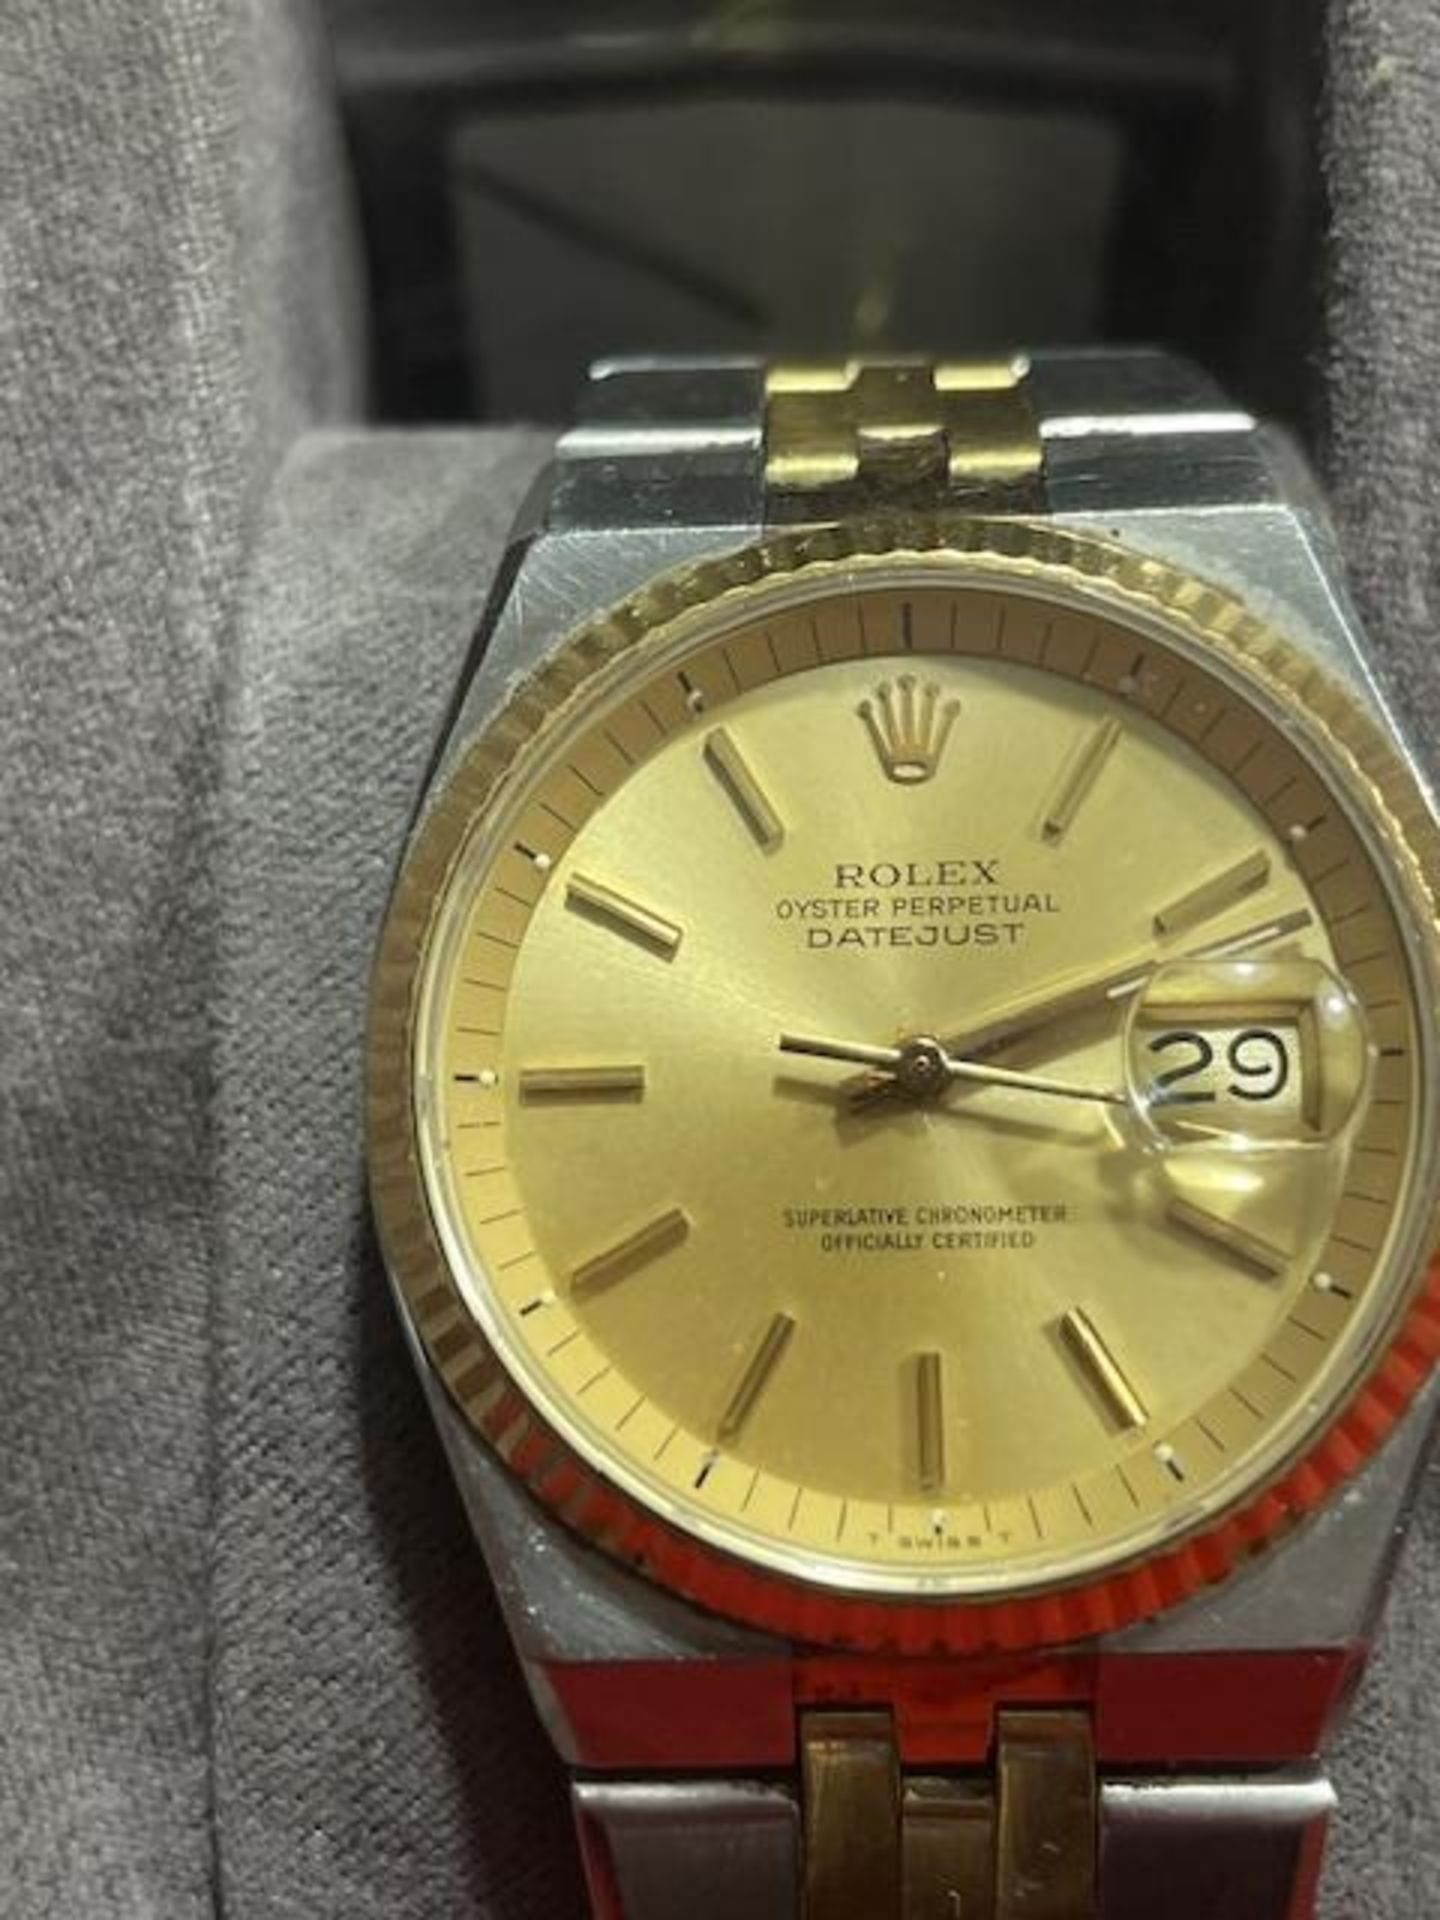 Rolex Oyster Purpetual DATEJUST Mens Watch - Image 10 of 20